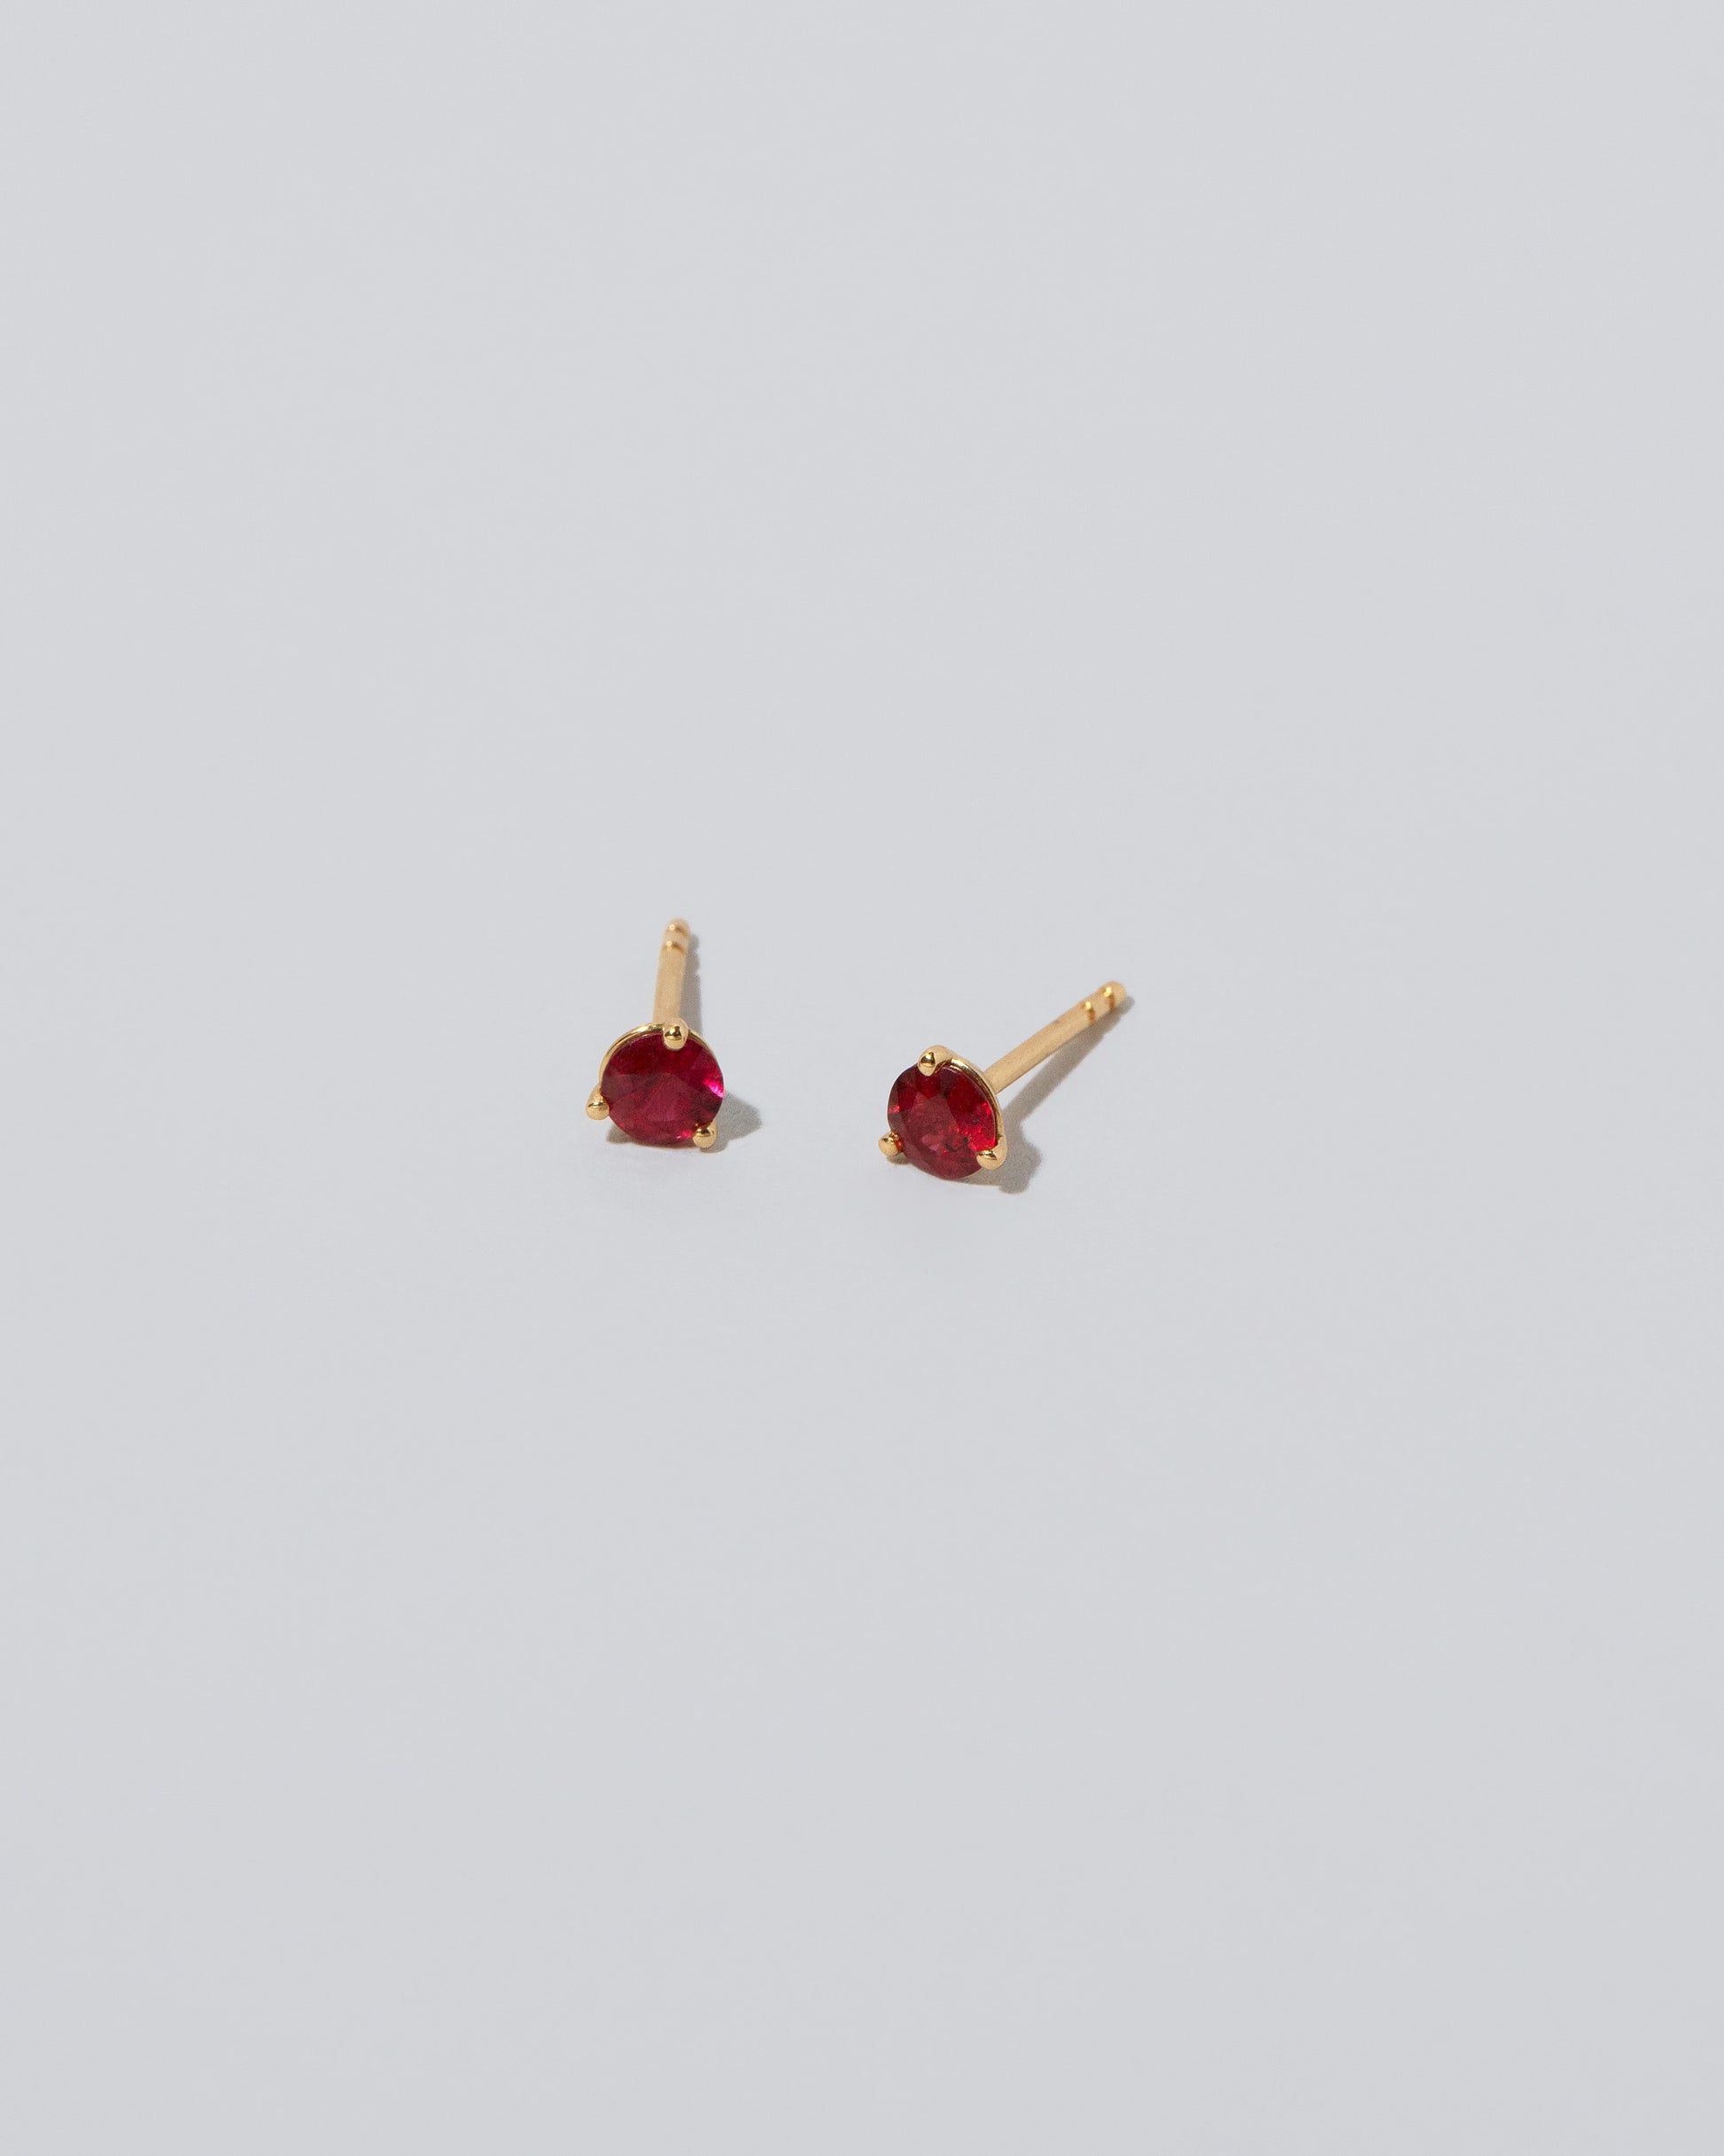 Martini Stud Earrings - Ruby on light color background.